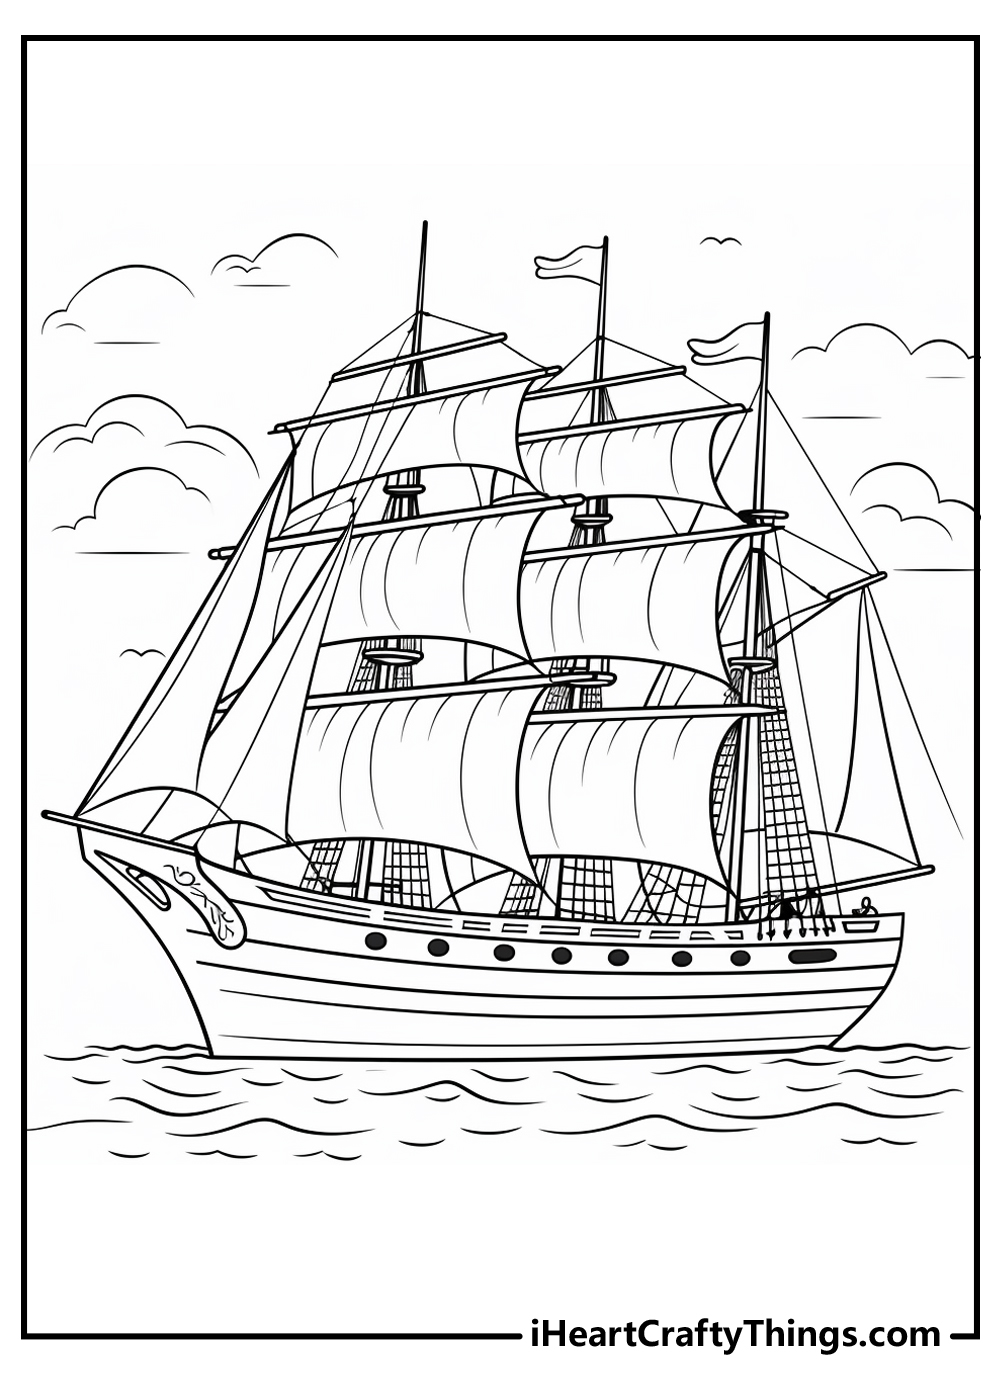 Ships and Boat Coloring Pages for Kids